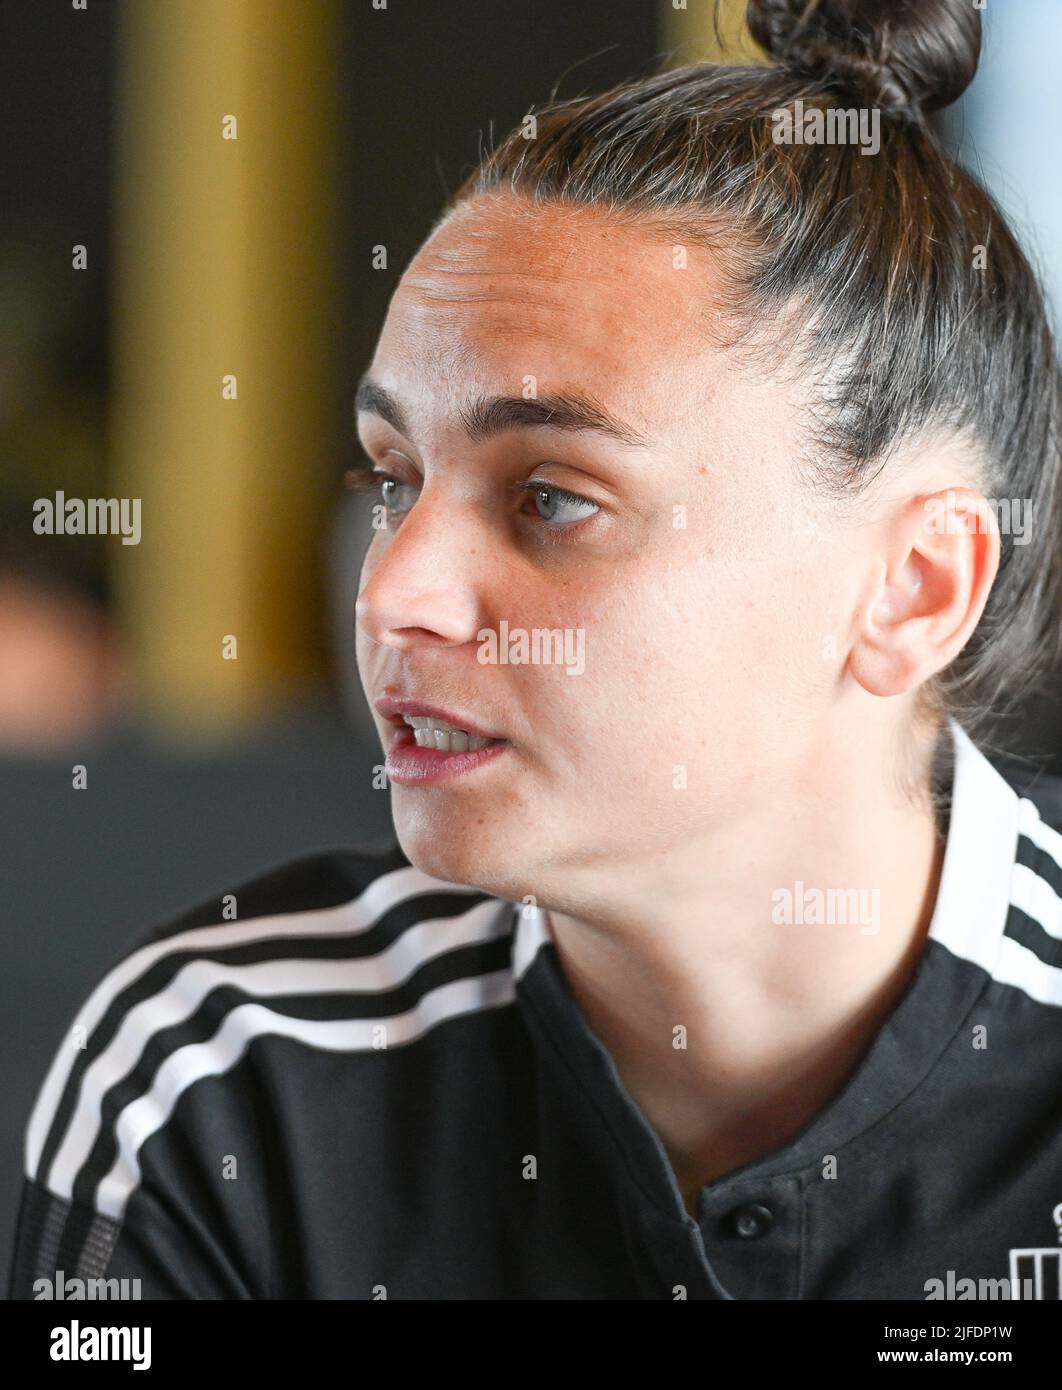 Tubize, Belgium. 02nd July, 2022. Belgium's goalkeeper Nicky Evrard pictured during a press conference of the Belgium's national women's soccer team the Red Flames, Saturday 02 July 2022 in Tubize. The Red Flames are preparing for the upcoming Women's Euro 2022 European Championships in England. BELGA PHOTO DAVID CATRY Credit: Belga News Agency/Alamy Live News Stock Photo